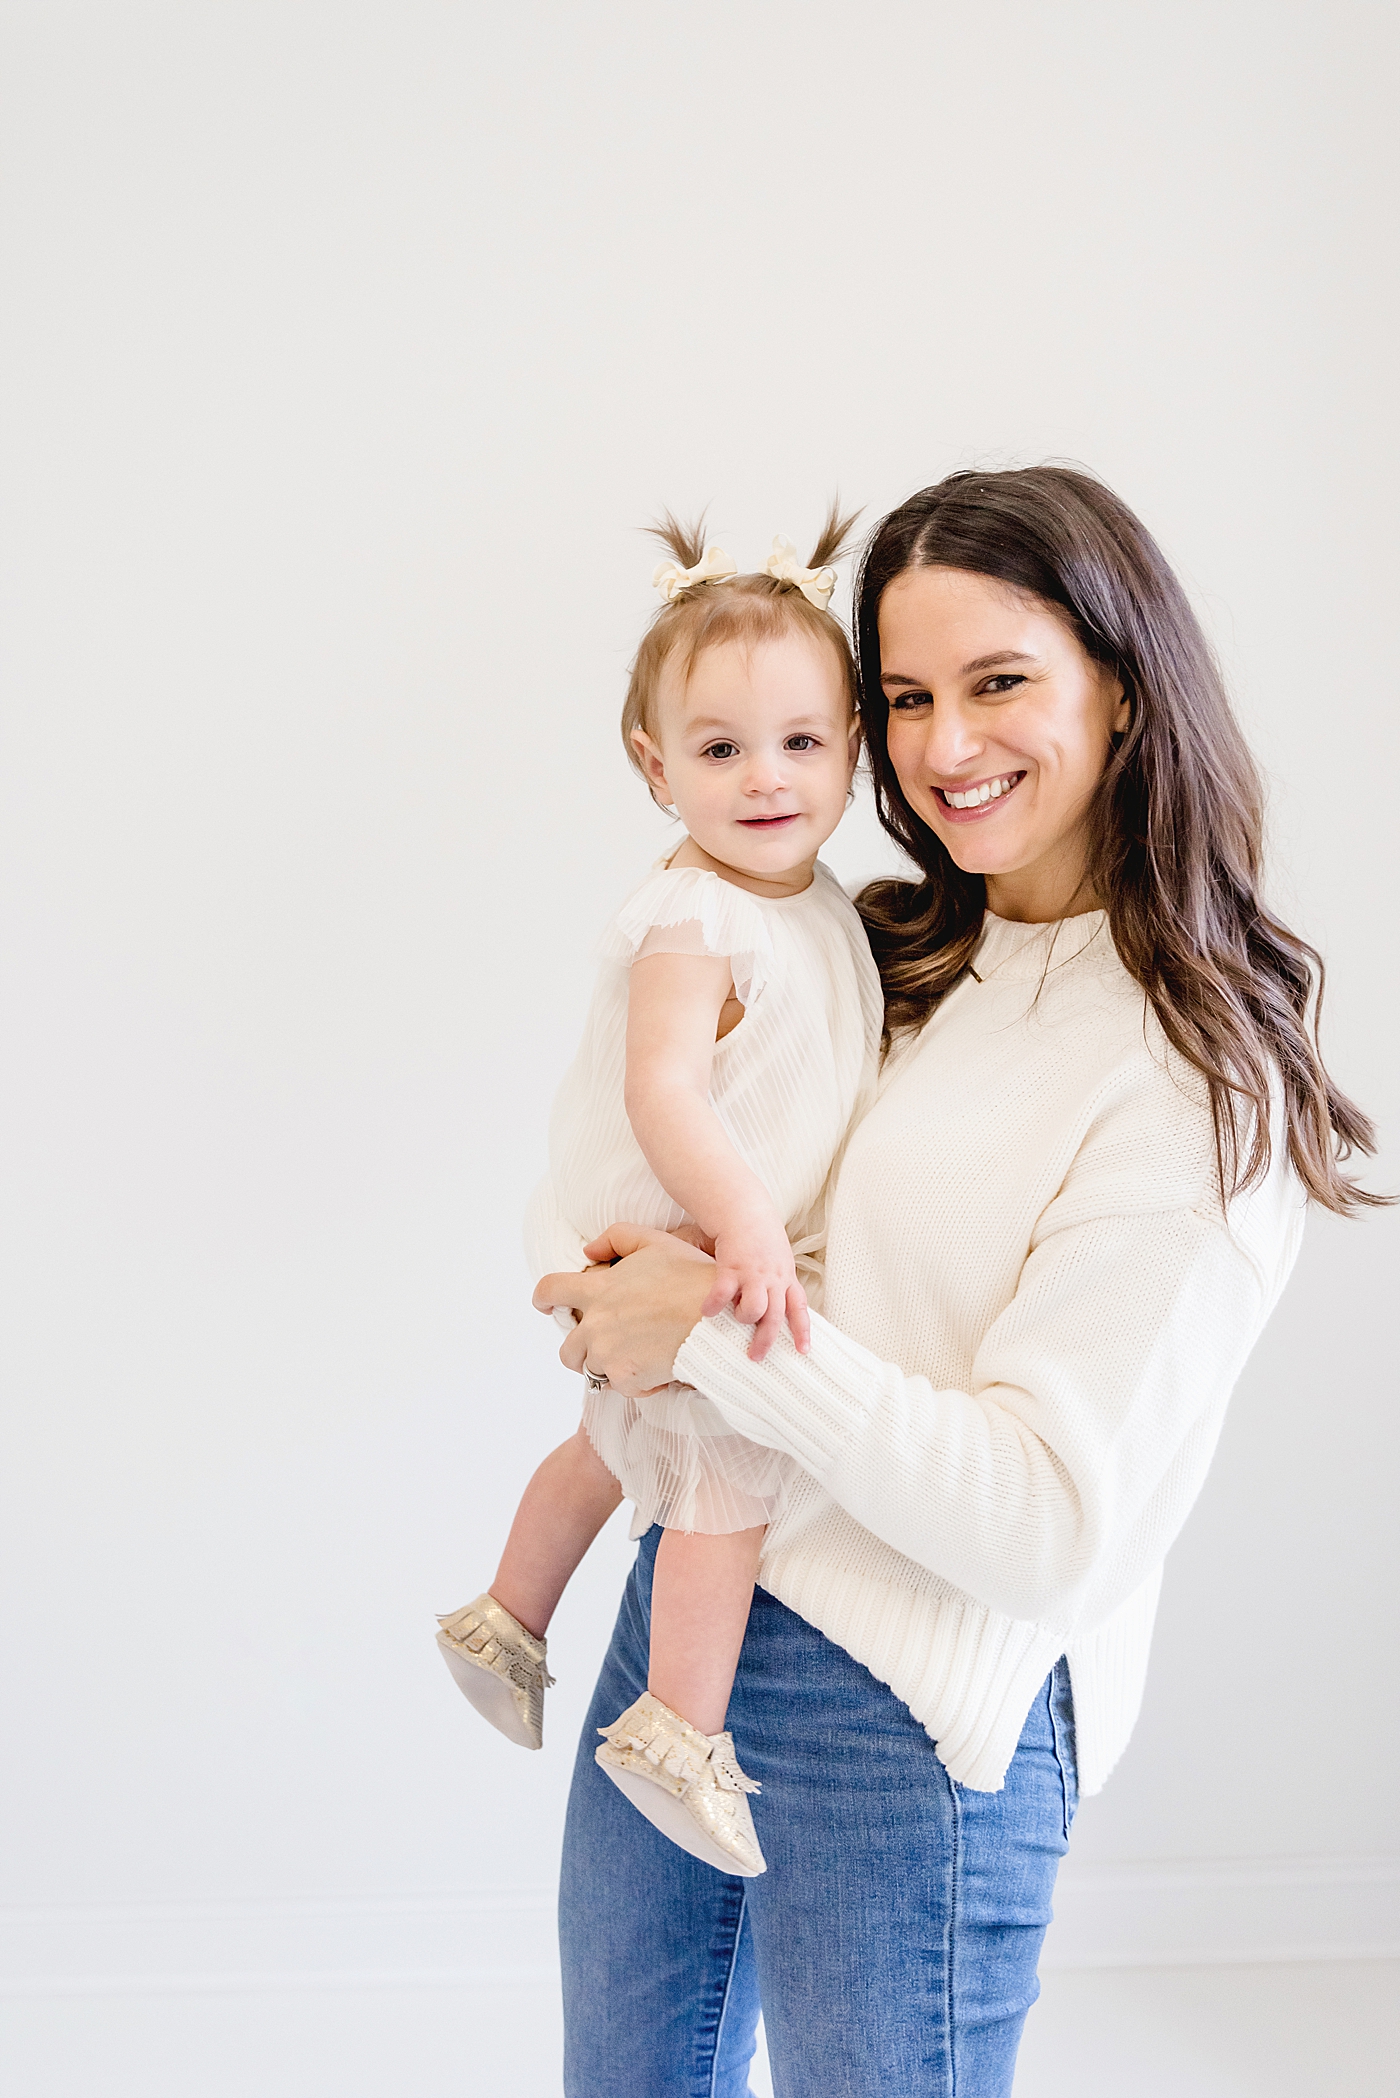 Baby girl in white with pigtails with mom | Baby photographer in Charlotte Anna Wisjo